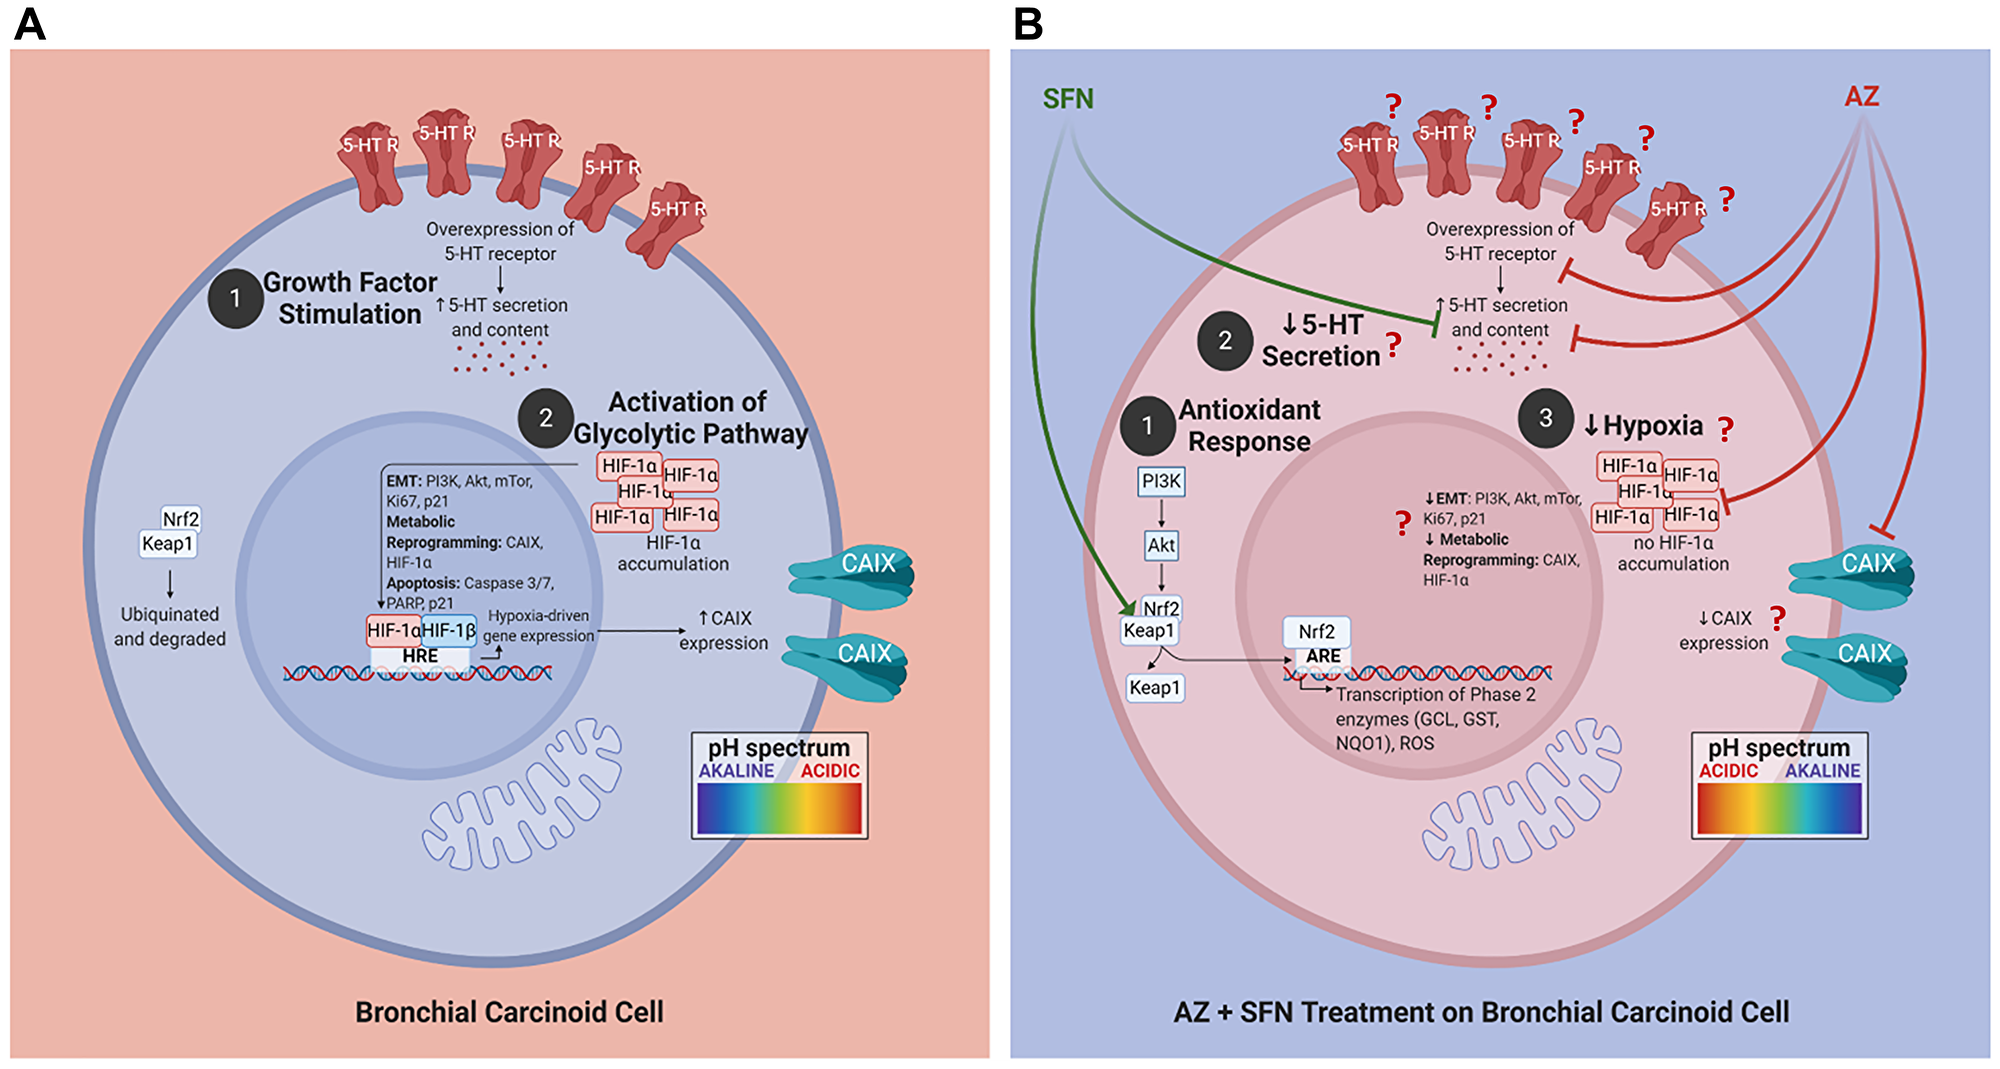 Figure 9: Proposed schema of AZ, SFN, and AZ+SFN targeting the pro-survival pathways in BC.